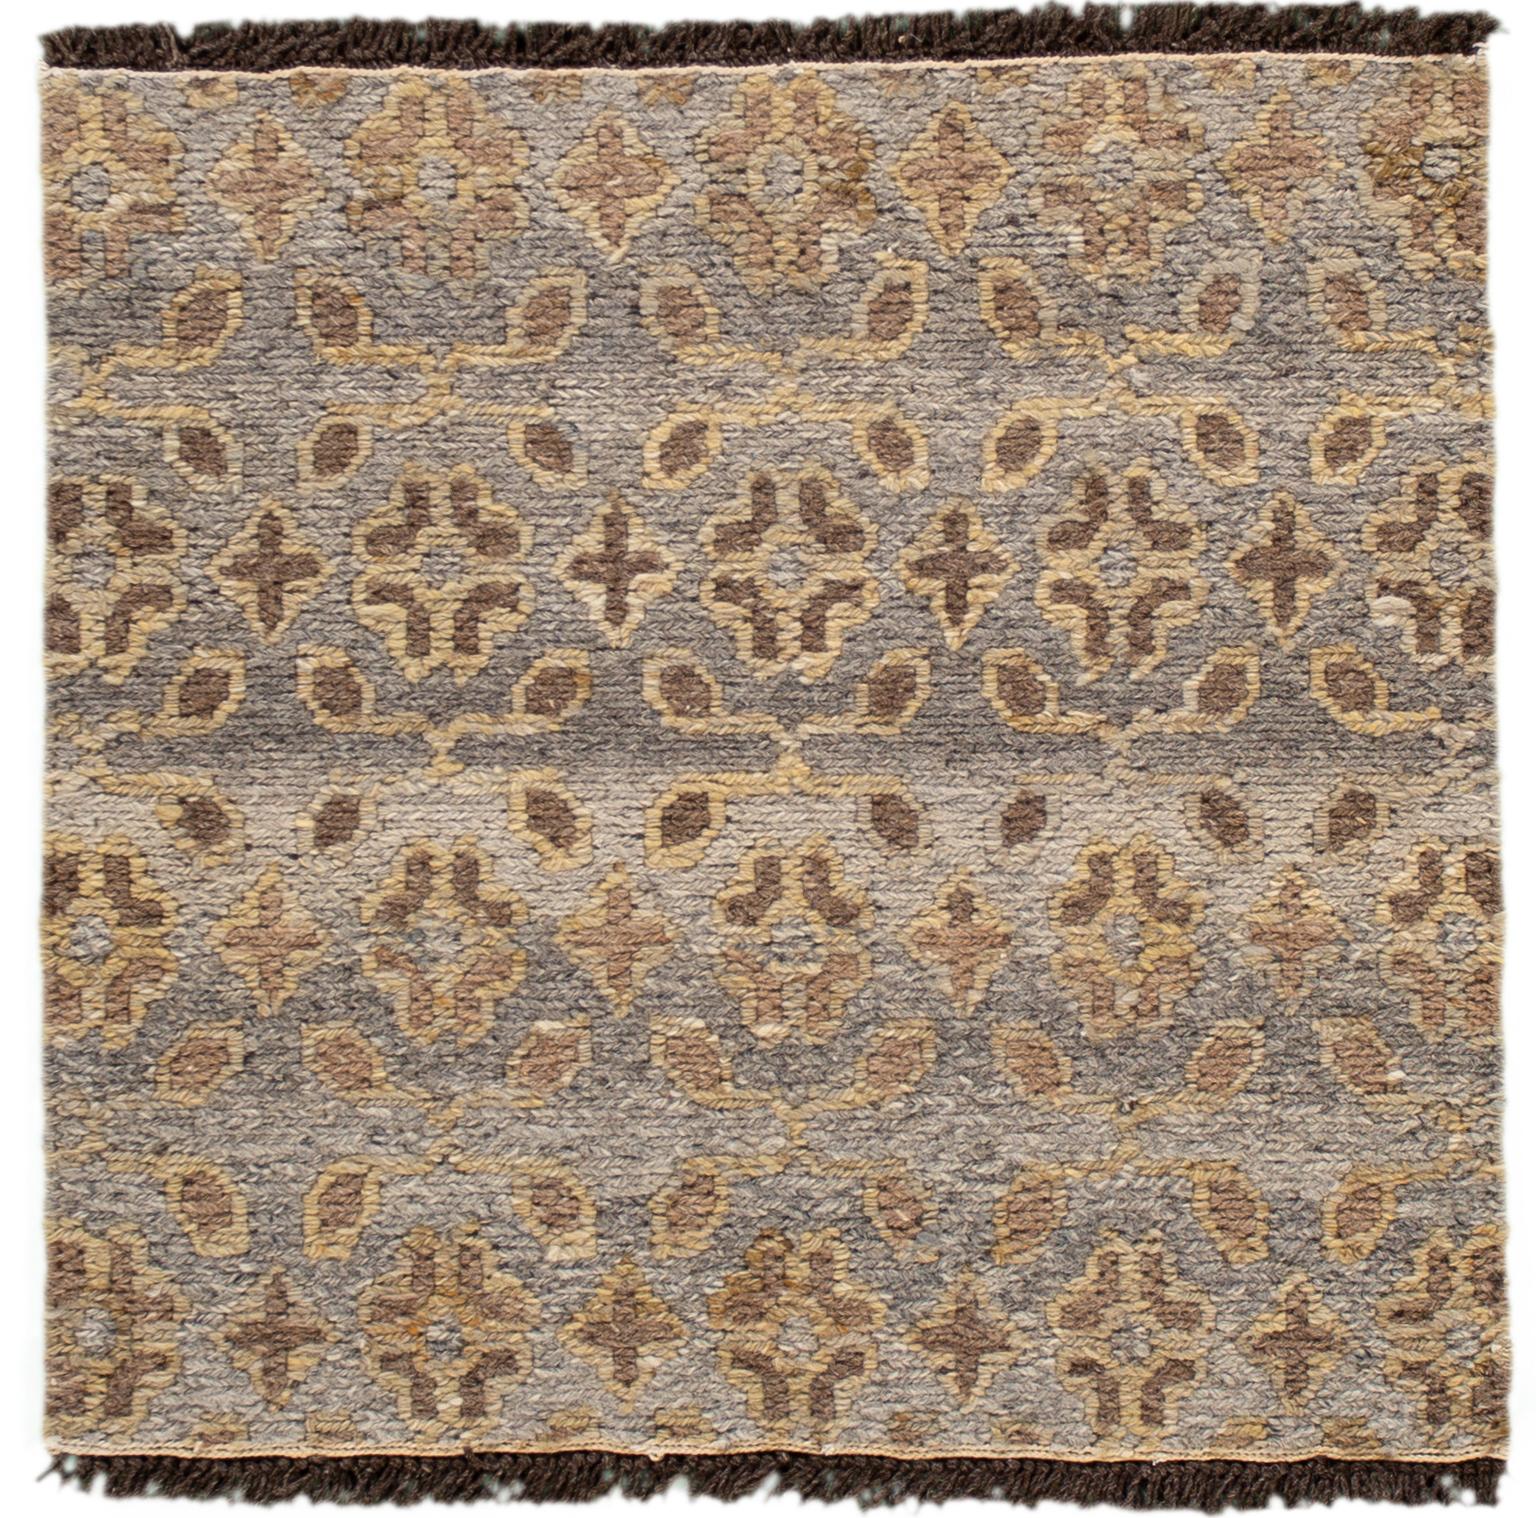 A contemporary hand knotted wool Sumack-style custom rug. Custom sizes and colors made-to-order.

Collection: Sumack
Material: Hand knotted wool
Lead time: Approx. 12 weeks
Available colors: As shown; other custom colors and styles